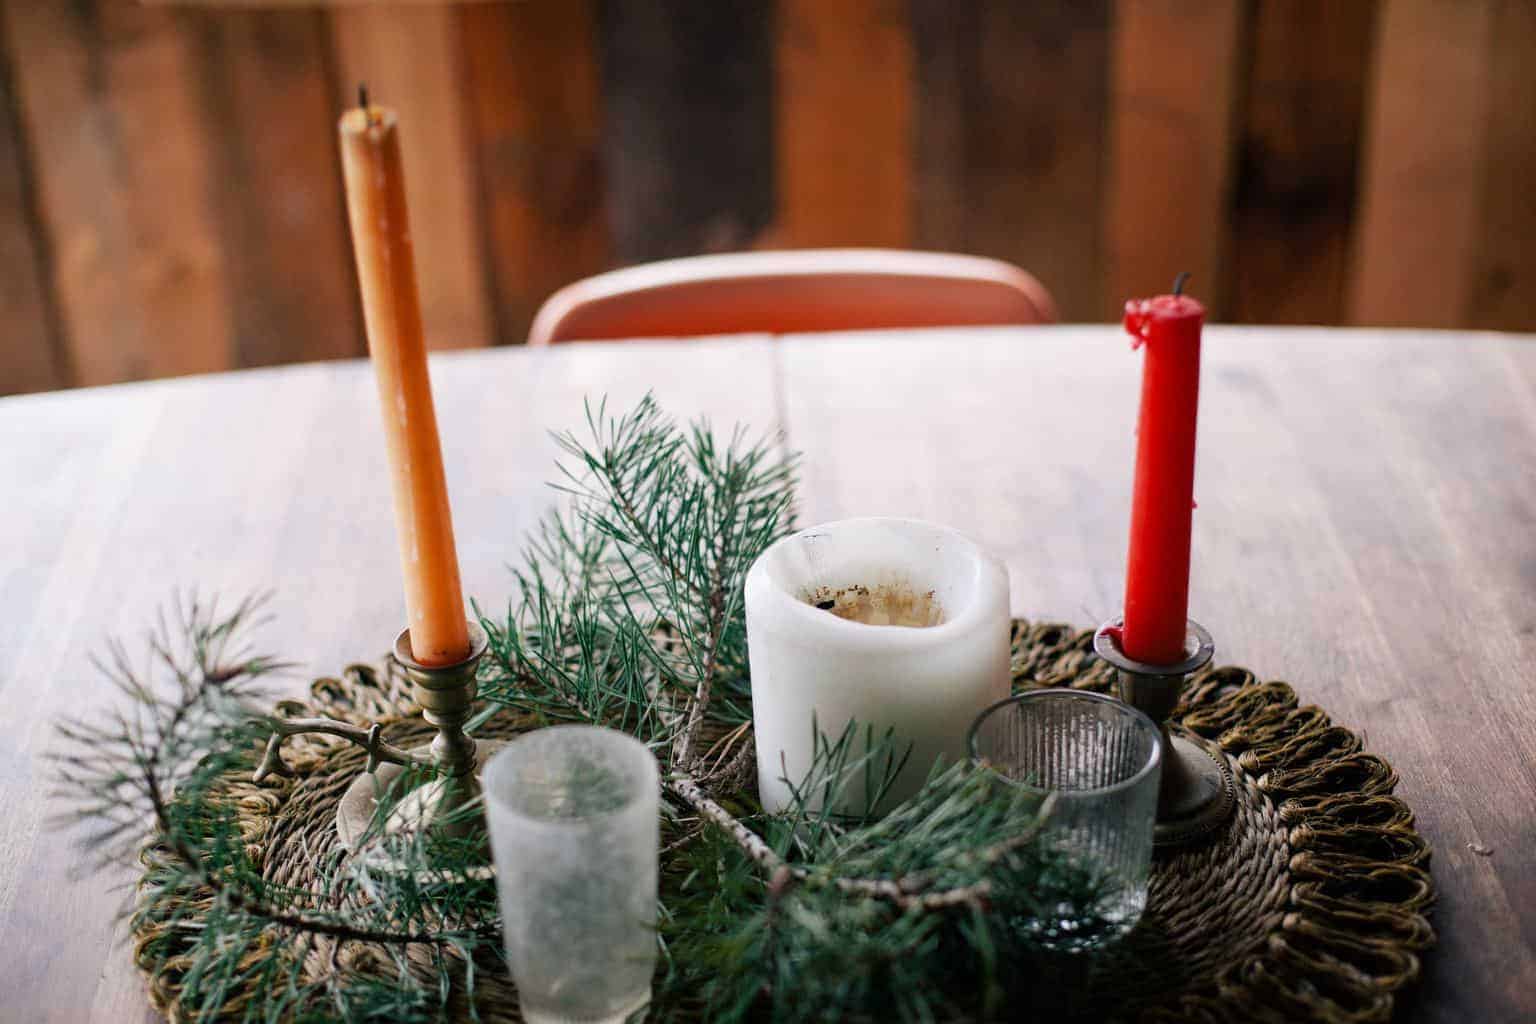 Attention! Beware of These Holiday Decor Pitfalls